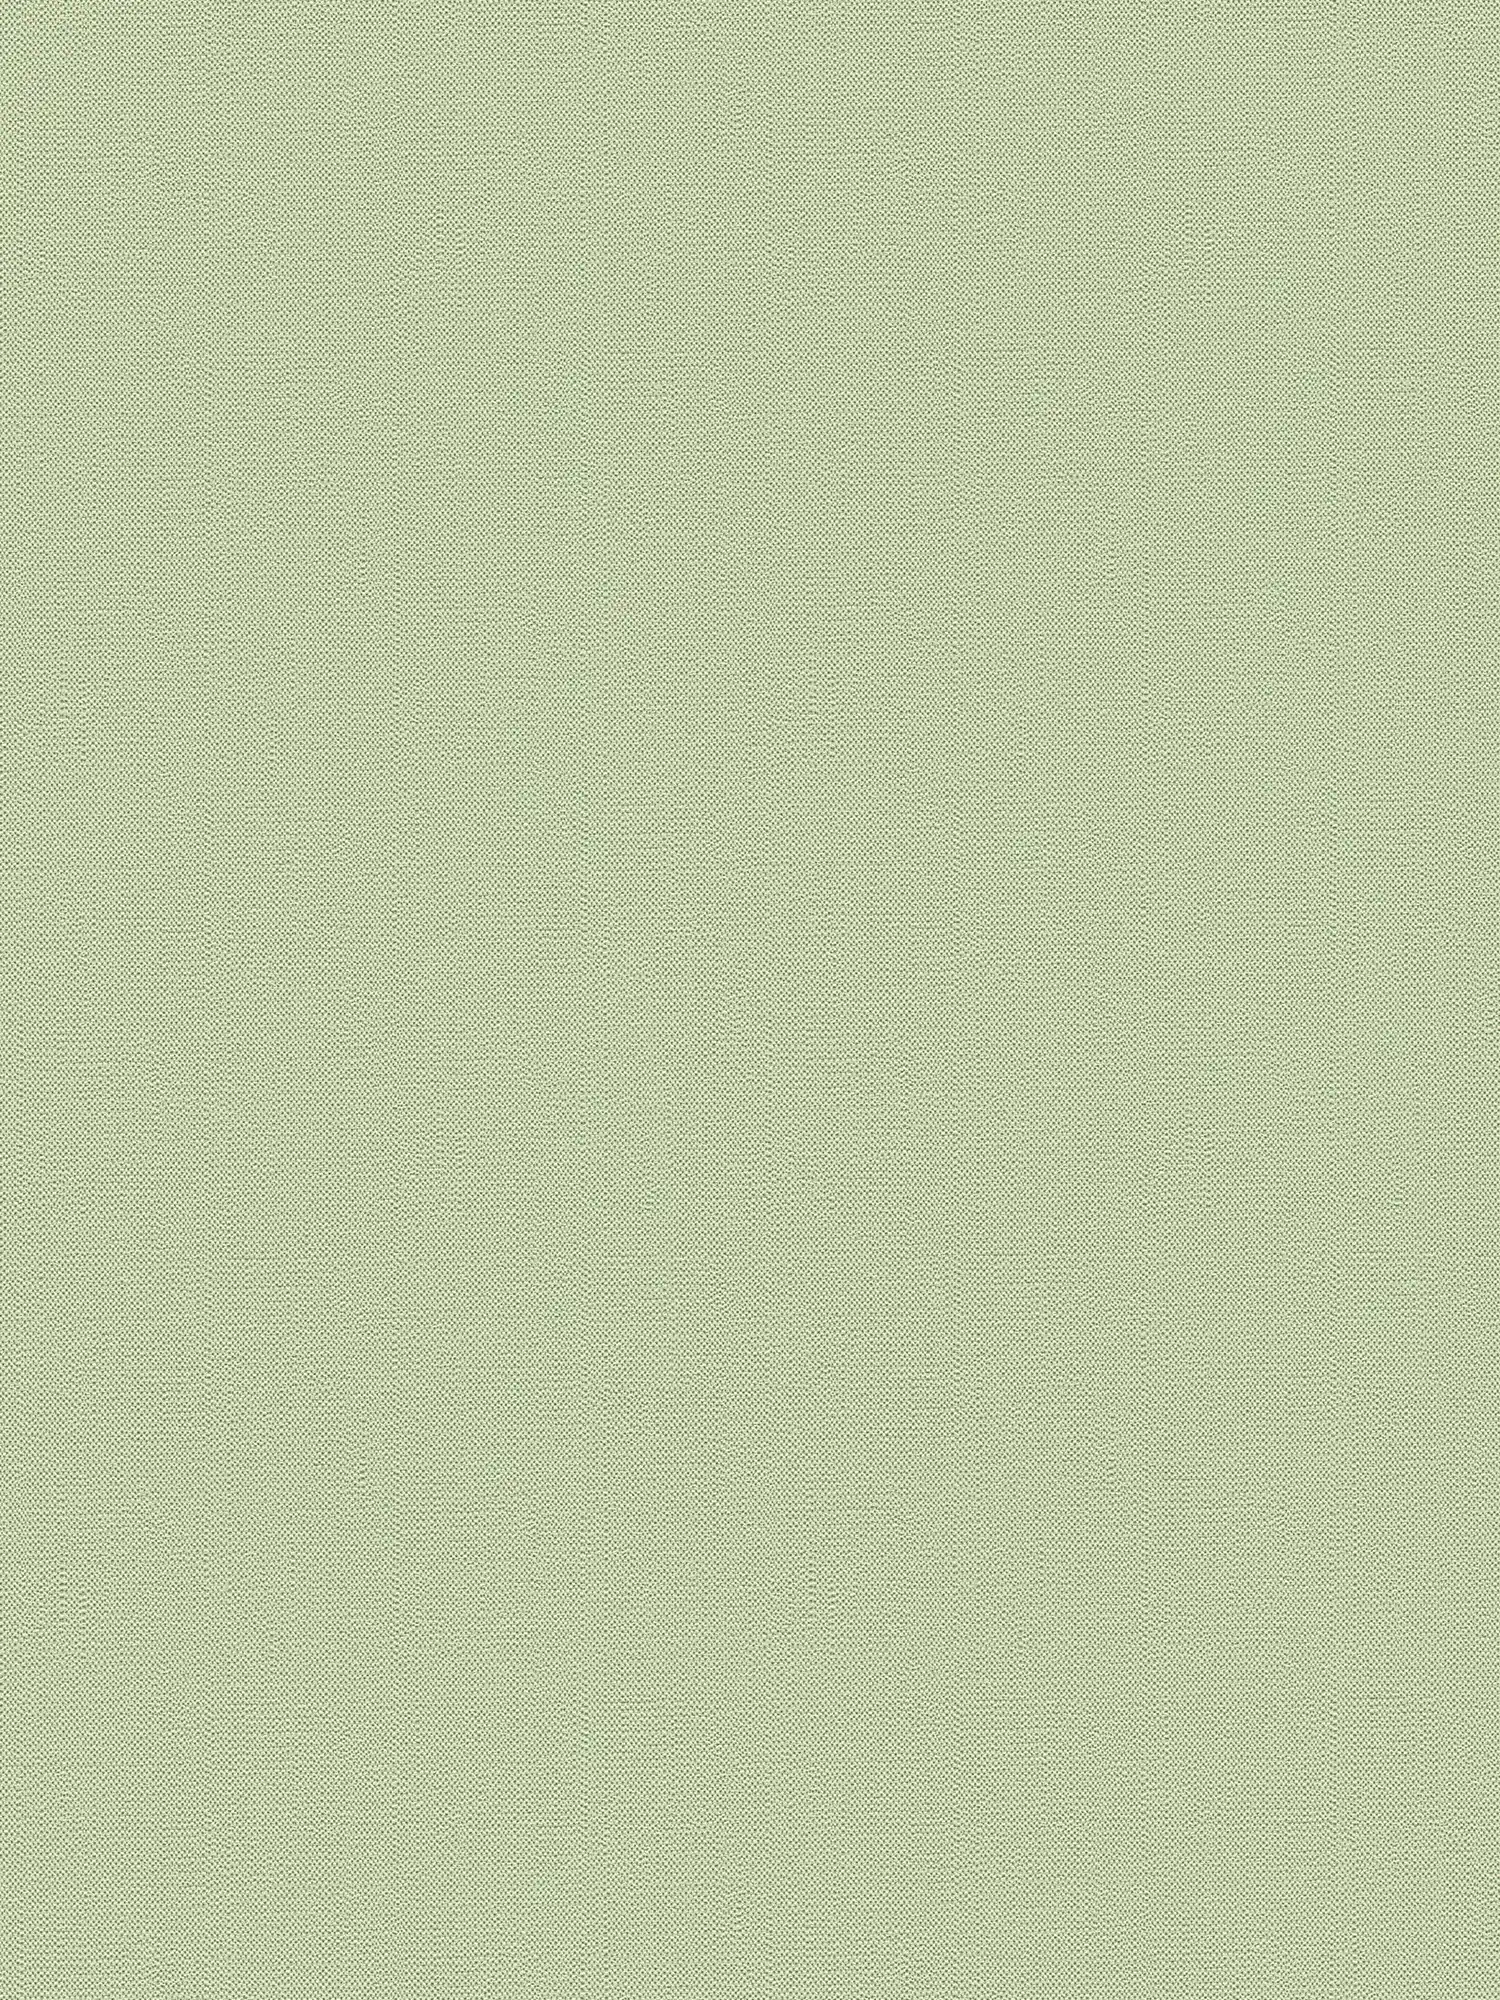 Non-woven wallpaper mint green with foam structure in linen look
